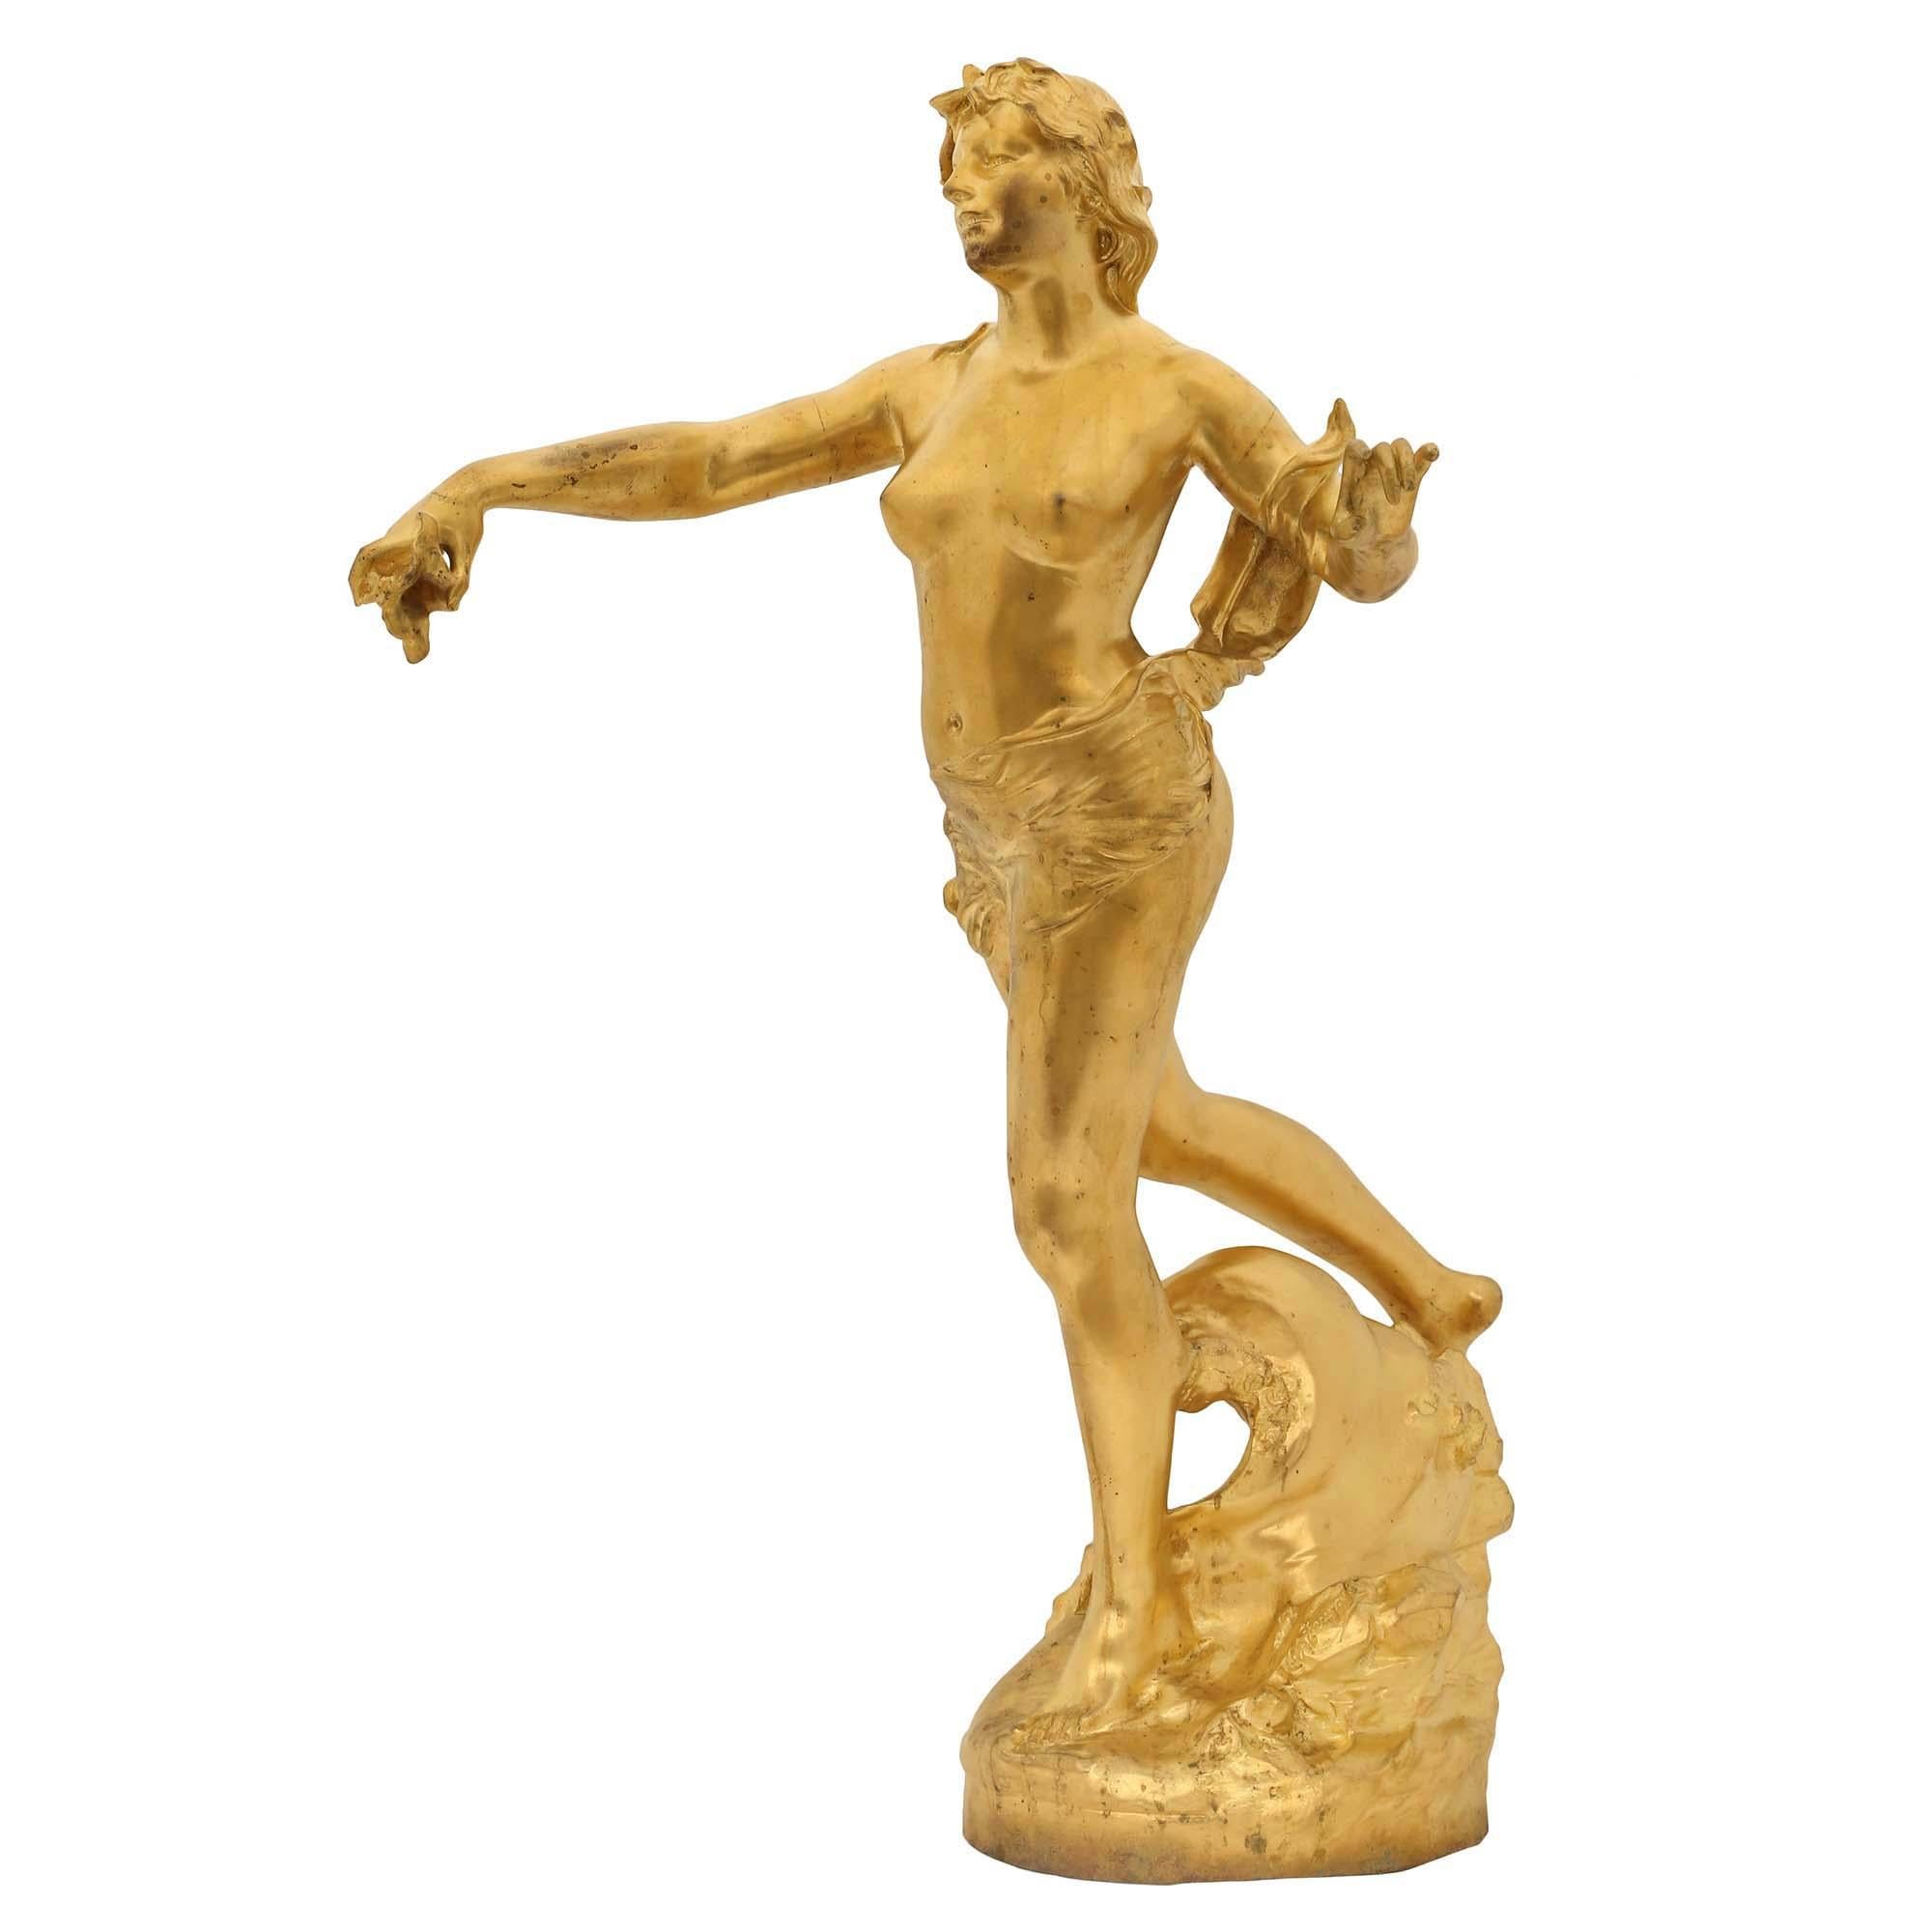 An extremely elegant French 19th century ormolu statue of Nereids, signed Claude-André Férigoule. The sculpture is raised on a circular base with a water and waves design. The nymph appears to be riding the waves, arms out stretched, holding a conch